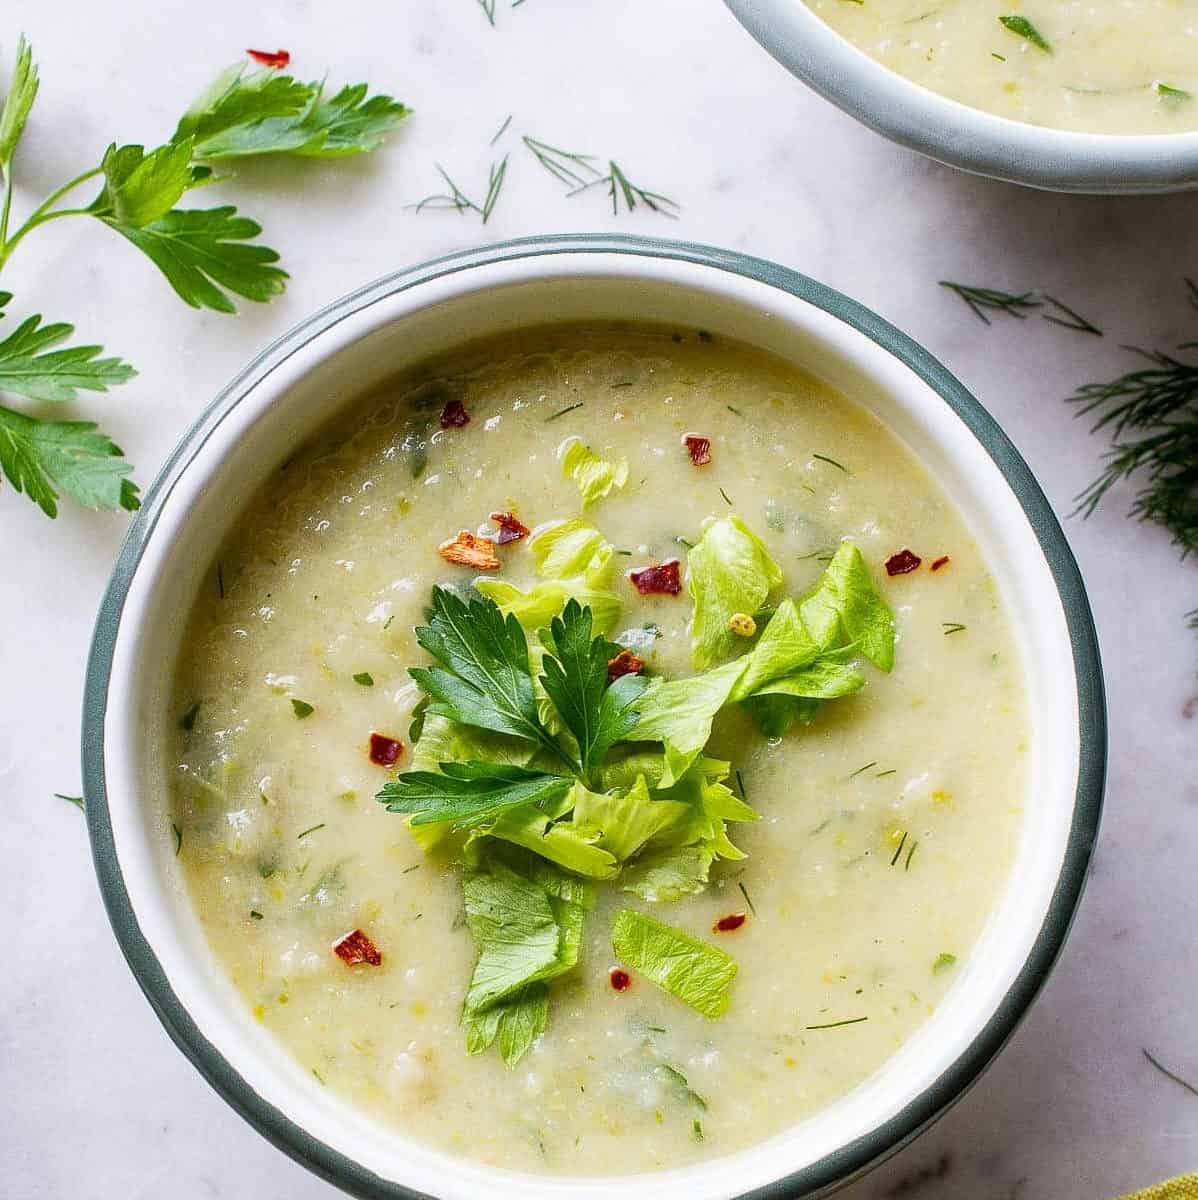  If you're looking for a comforting and nutritious meal, this soup is a great choice